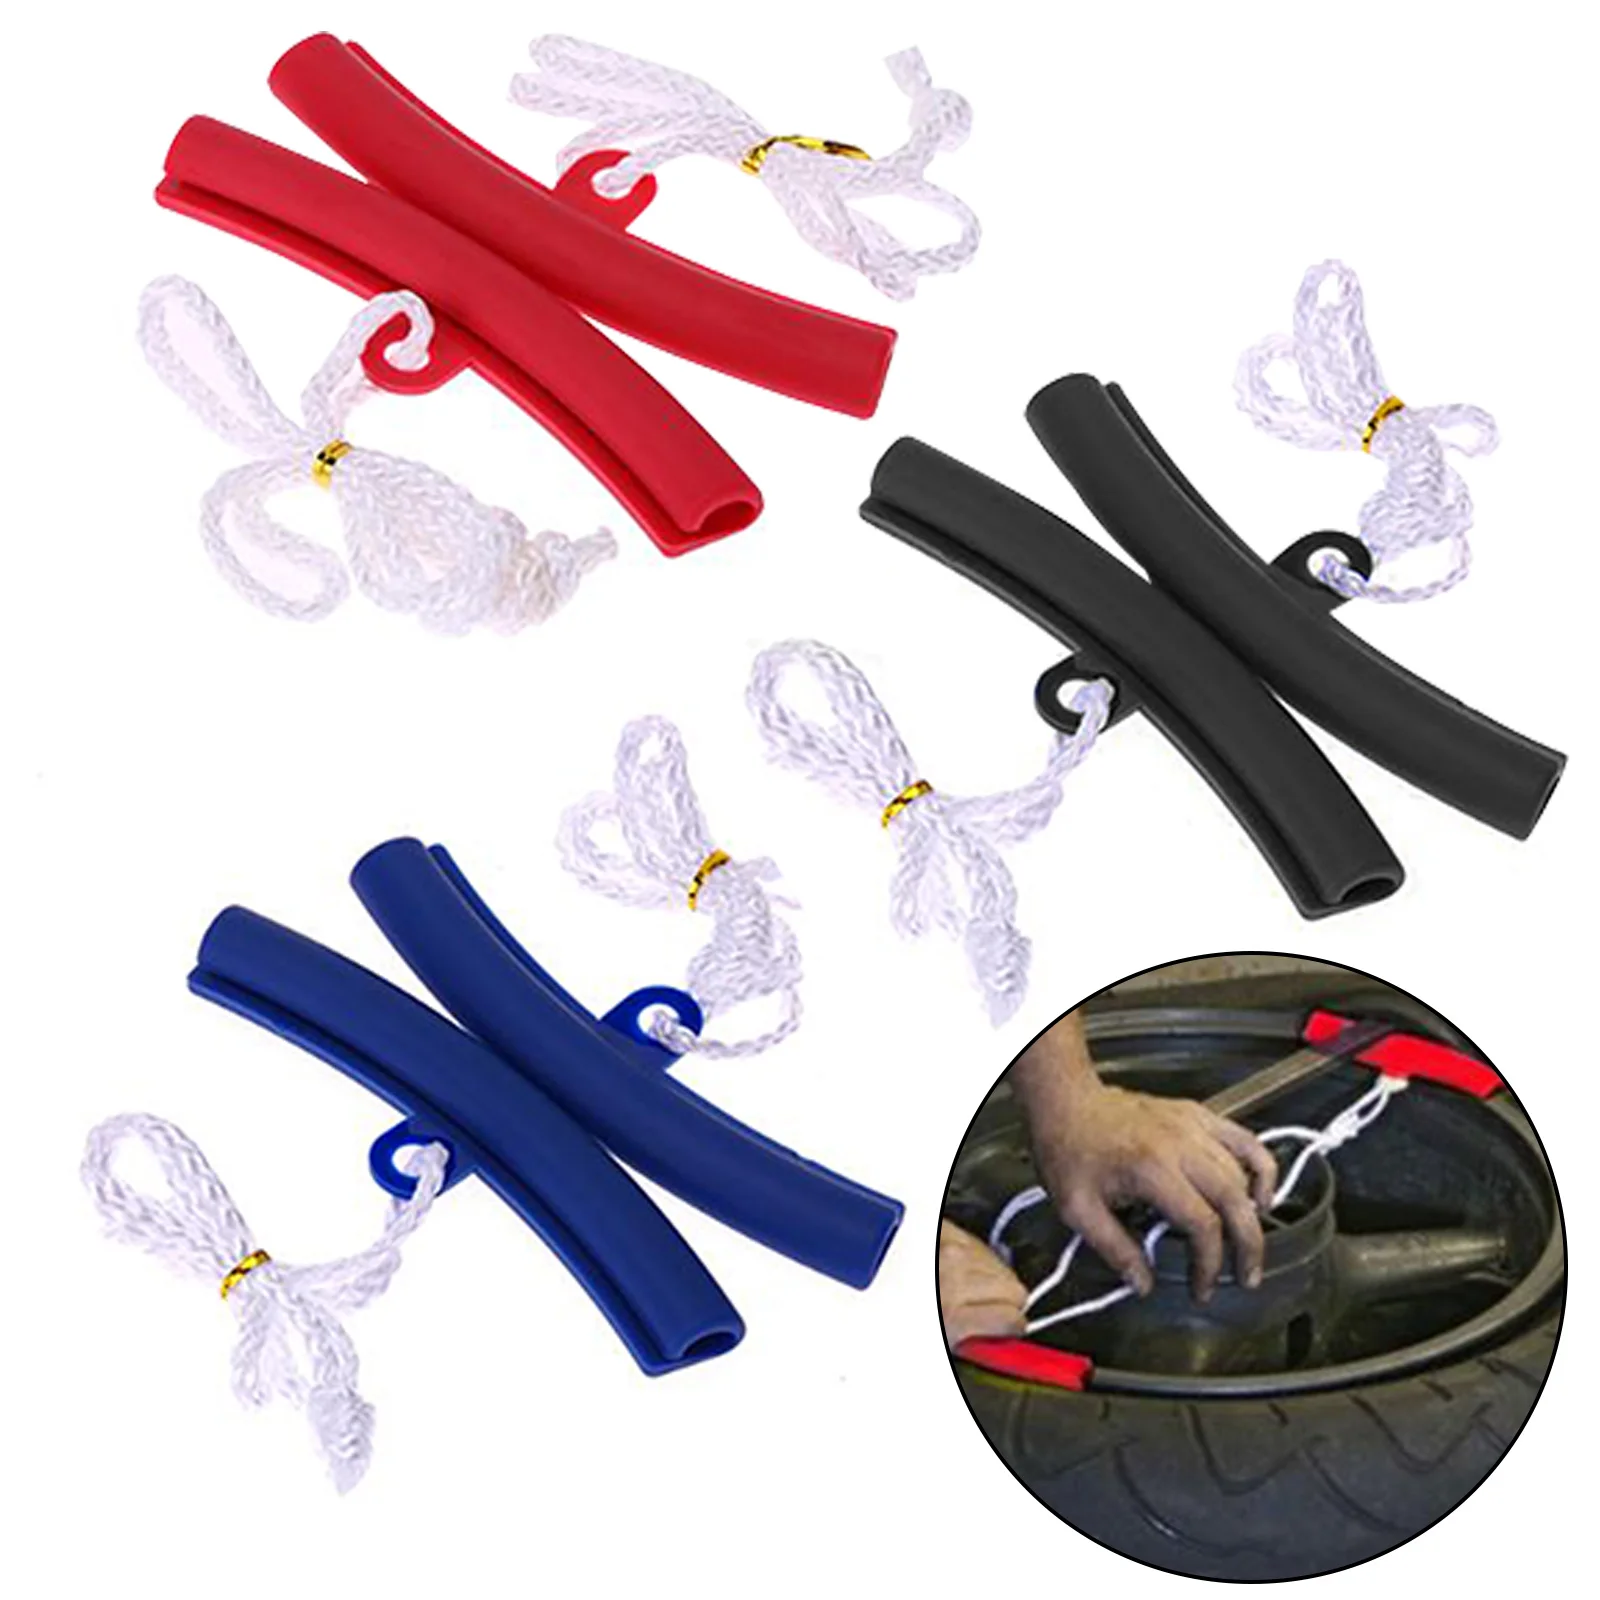 2 Pcs Motorcycle Changing Tyre Tire Wheel Rim Edge Cover Saver Protector Tool